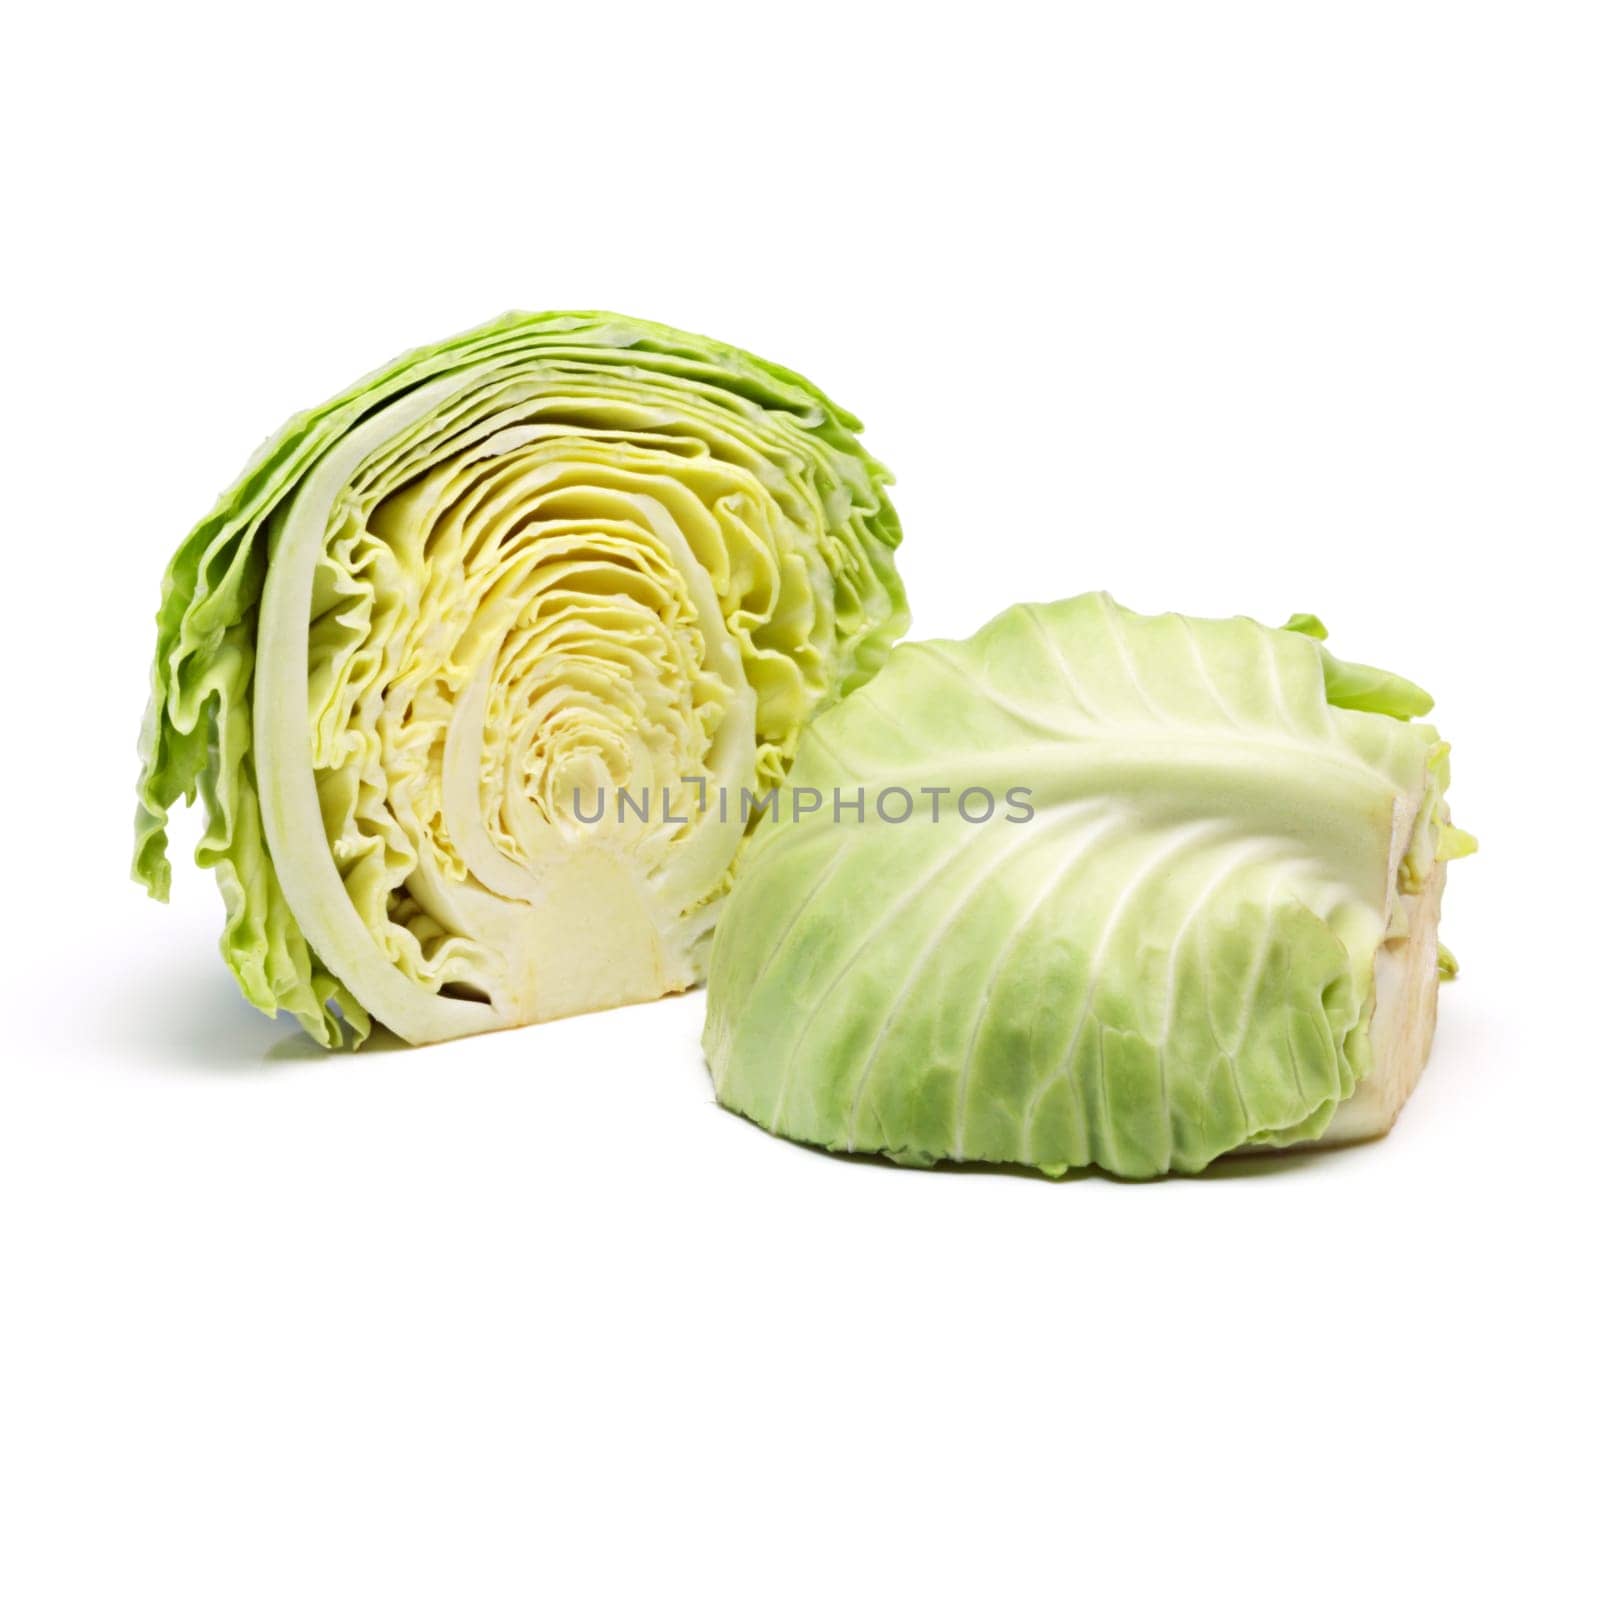 Cabbage half, vegetable or edible plant for harvest, fresh leafs and food for raw produce on diet on white background. Green, nutrition or healthy organic with vitamins and round with antioxidant.